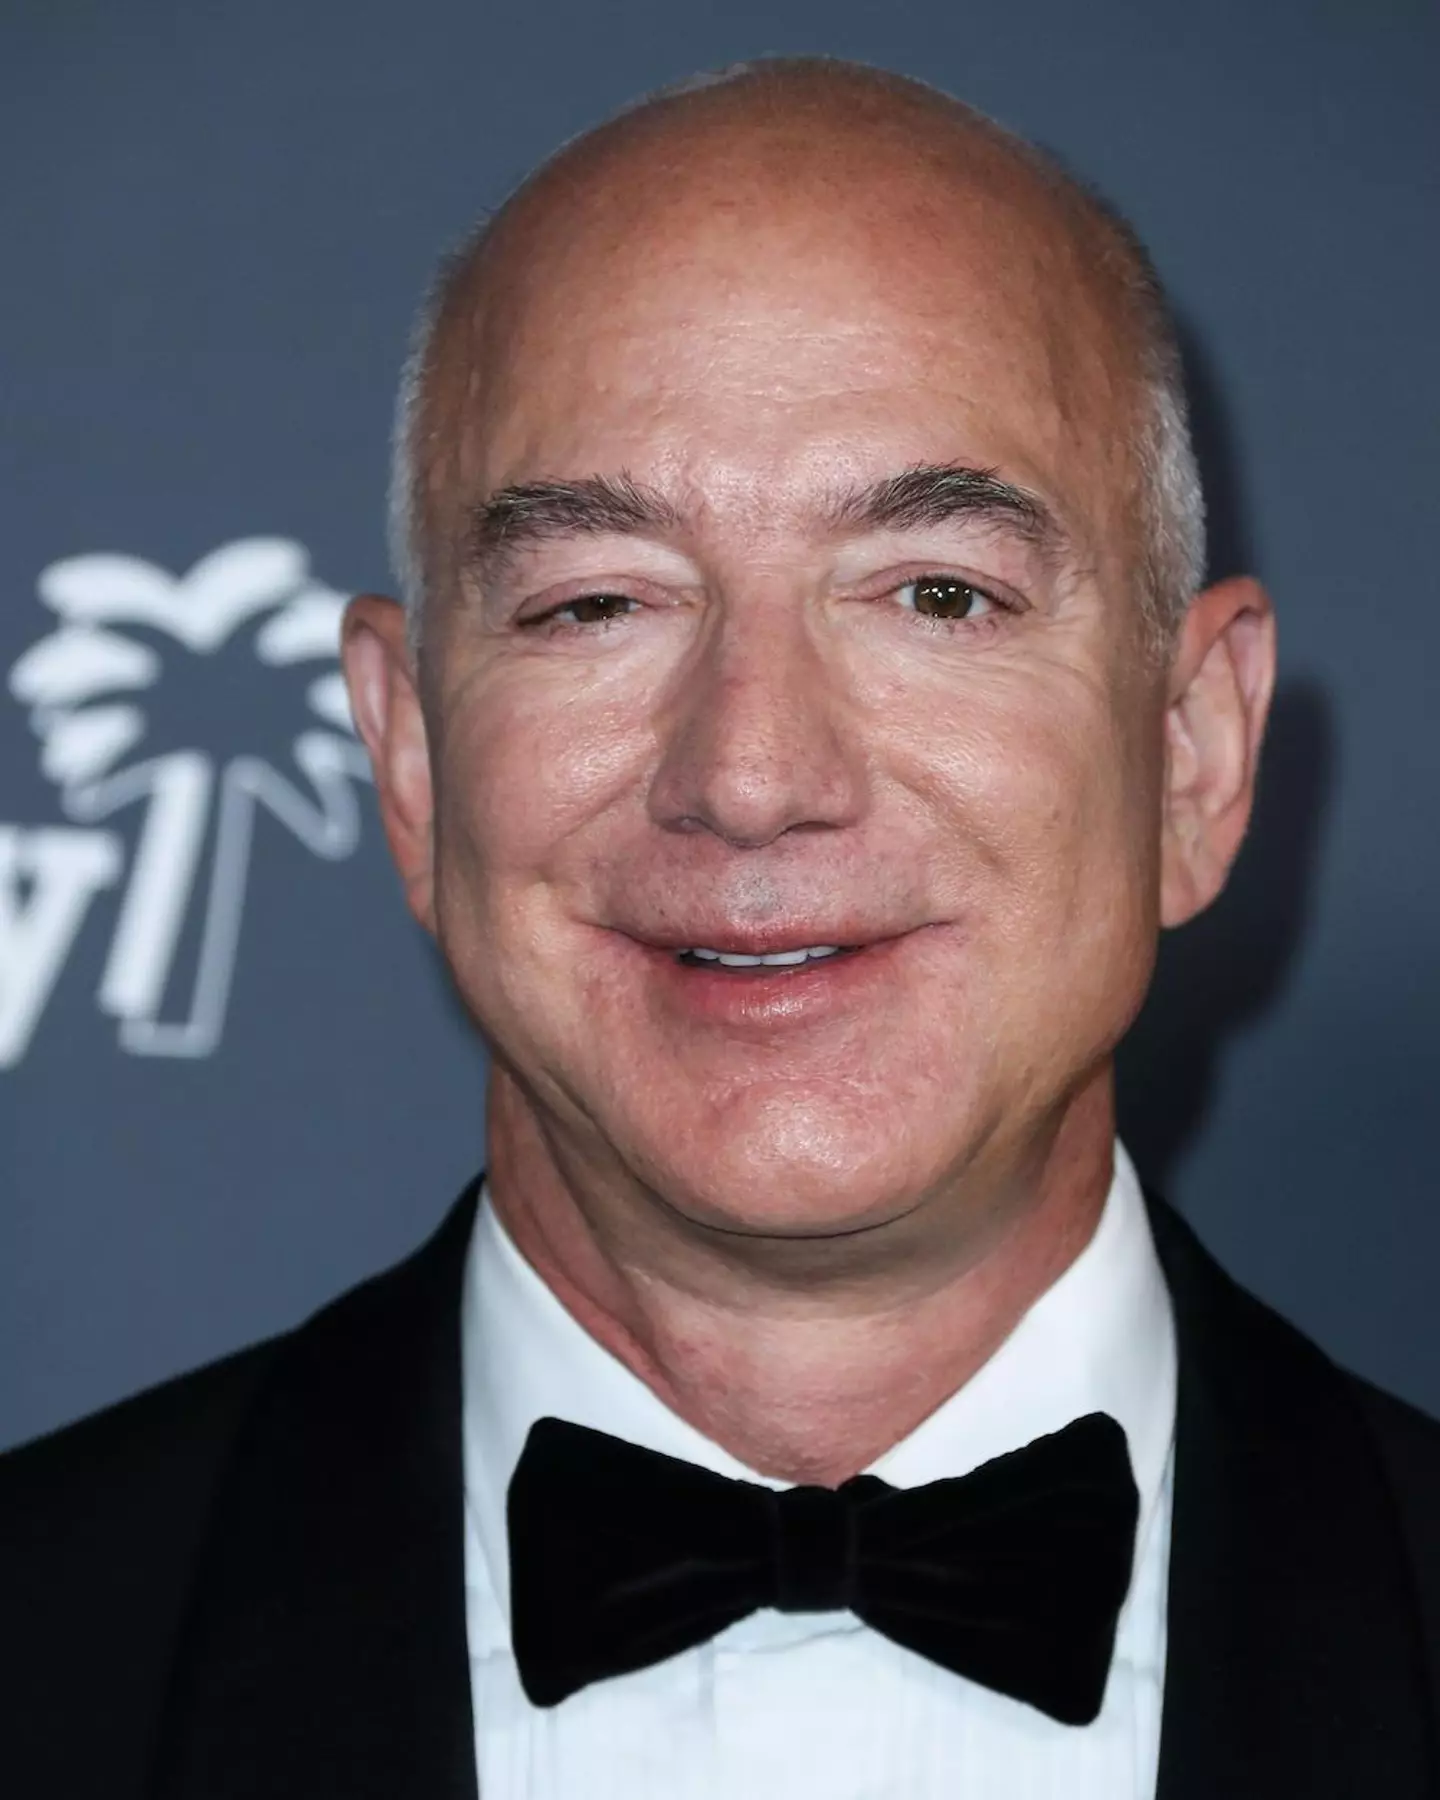 Jeff Bezos' net worth is currently just shy of $100 billion less than Musk’s.